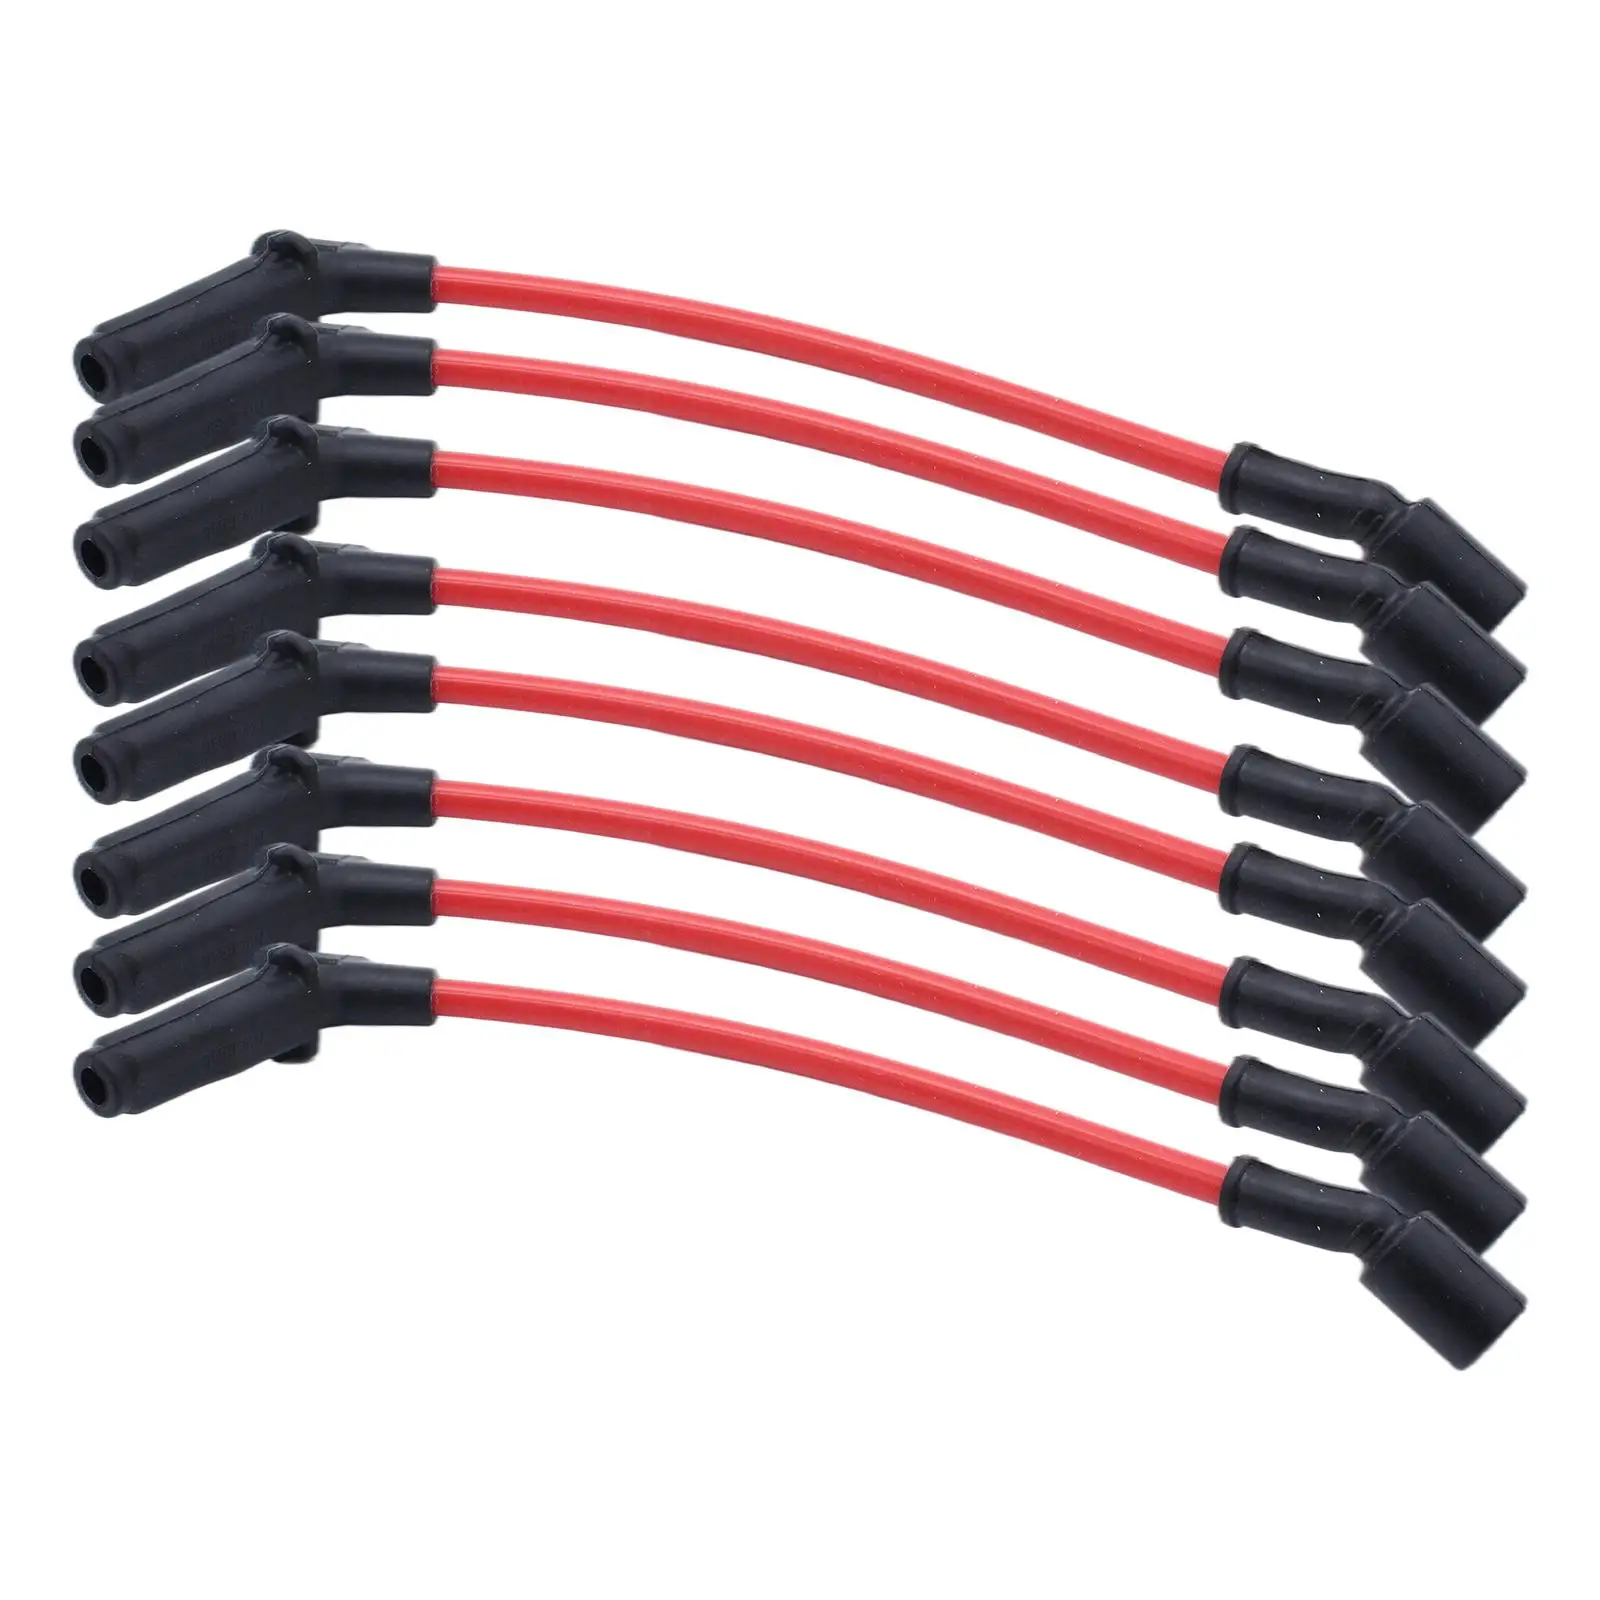 8x Car Spark Plug Wires Set 9059 999-2006 High Strength Easy to Install Direct Replaces High Performance